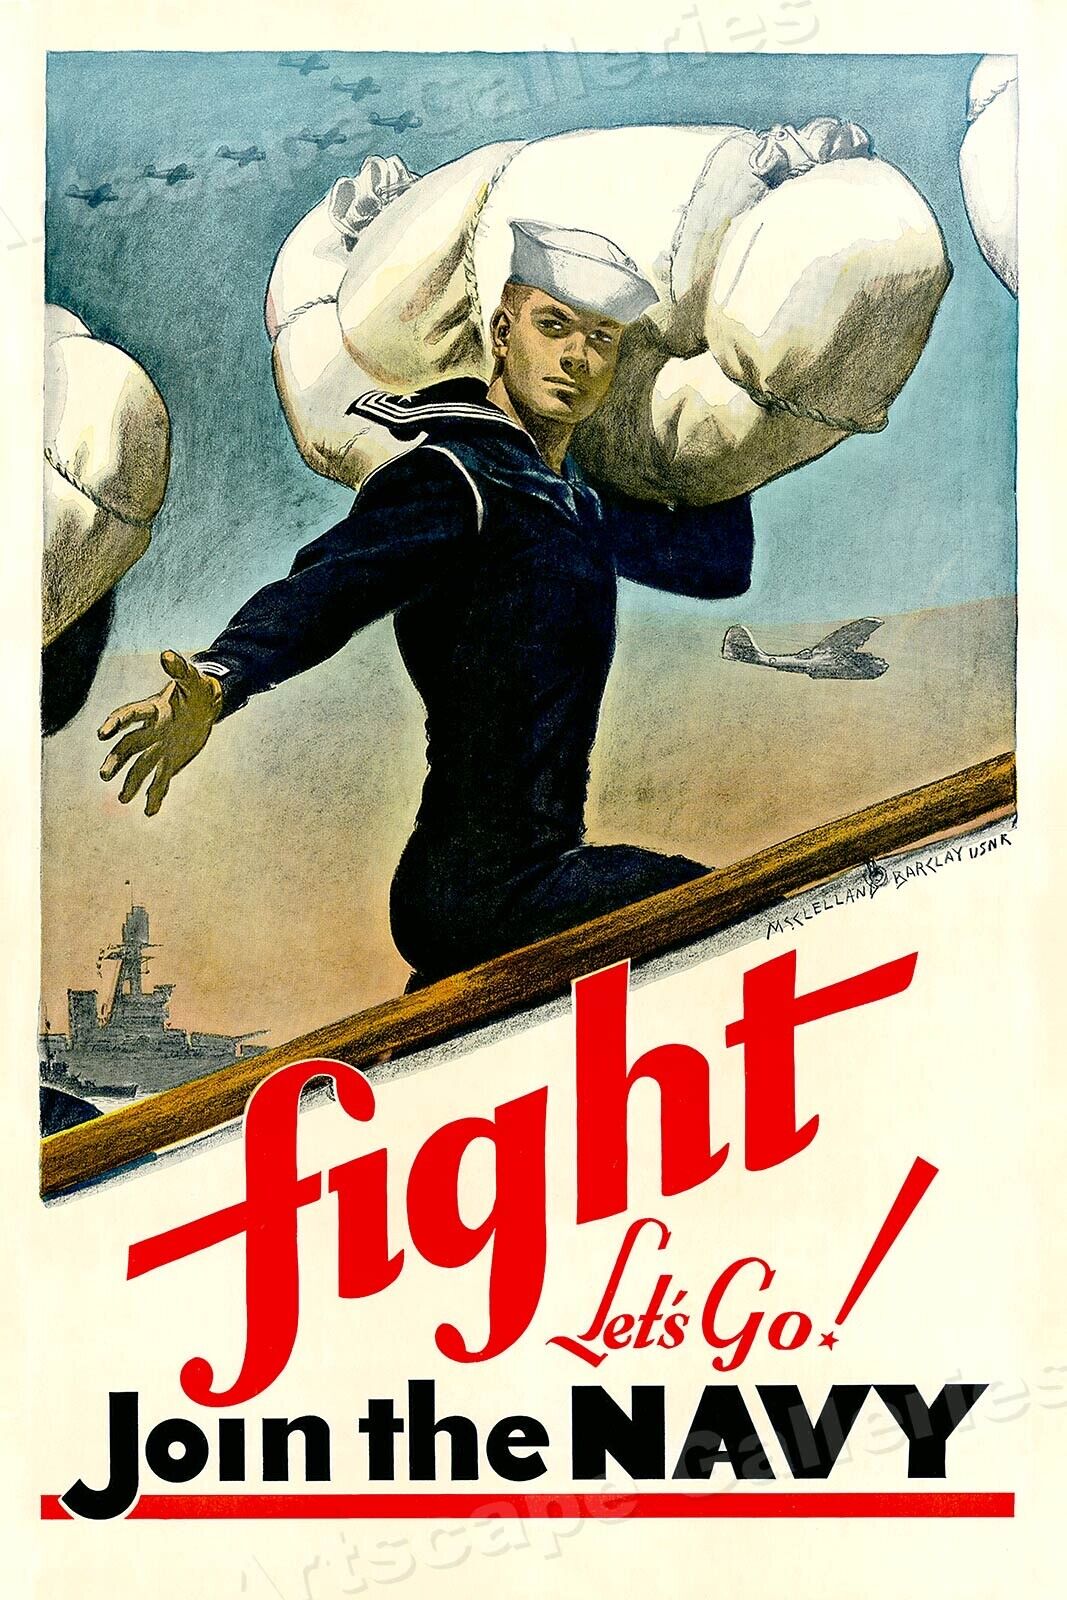 Fight Join the Navy - 1940s Vintage Style World War II Navy Poster - 16x24